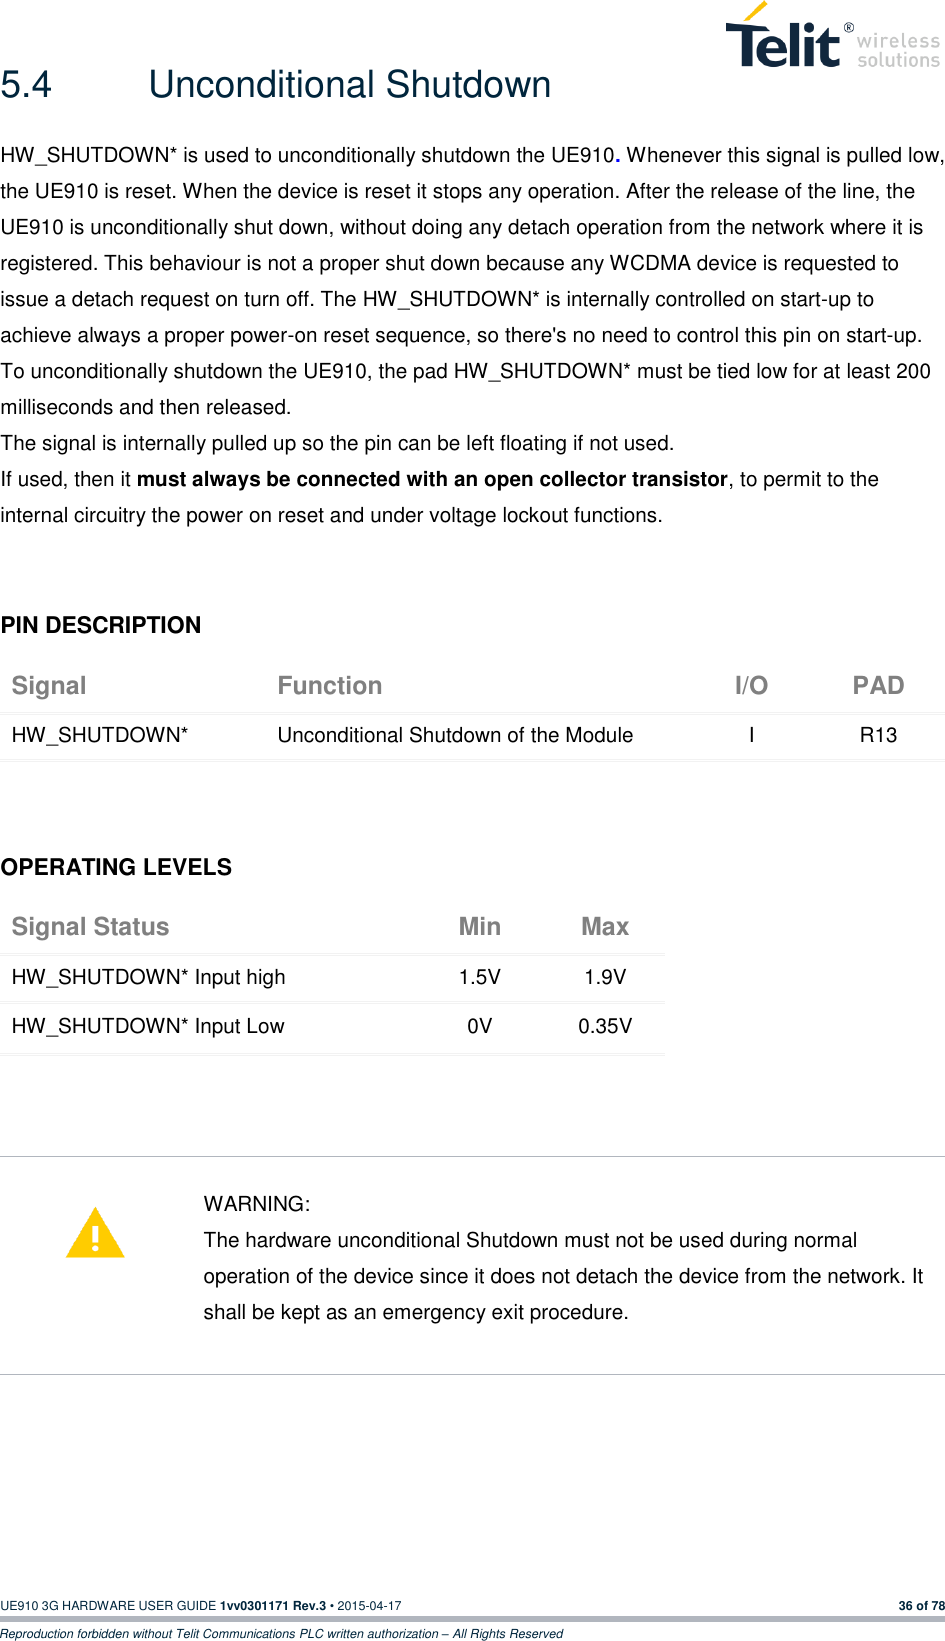  UE910 3G HARDWARE USER GUIDE 1vv0301171 Rev.3 • 2015-04-17 36 of 78 Reproduction forbidden without Telit Communications PLC written authorization – All Rights Reserved 5.4  Unconditional Shutdown HW_SHUTDOWN* is used to unconditionally shutdown the UE910. Whenever this signal is pulled low, the UE910 is reset. When the device is reset it stops any operation. After the release of the line, the UE910 is unconditionally shut down, without doing any detach operation from the network where it is registered. This behaviour is not a proper shut down because any WCDMA device is requested to issue a detach request on turn off. The HW_SHUTDOWN* is internally controlled on start-up to achieve always a proper power-on reset sequence, so there&apos;s no need to control this pin on start-up.  To unconditionally shutdown the UE910, the pad HW_SHUTDOWN* must be tied low for at least 200 milliseconds and then released. The signal is internally pulled up so the pin can be left floating if not used. If used, then it must always be connected with an open collector transistor, to permit to the internal circuitry the power on reset and under voltage lockout functions.  PIN DESCRIPTION Signal Function I/O PAD HW_SHUTDOWN* Unconditional Shutdown of the Module I R13    OPERATING LEVELS Signal Status Min Max HW_SHUTDOWN* Input high 1.5V 1.9V HW_SHUTDOWN* Input Low 0V 0.35V       WARNING: The hardware unconditional Shutdown must not be used during normal operation of the device since it does not detach the device from the network. It shall be kept as an emergency exit procedure.       